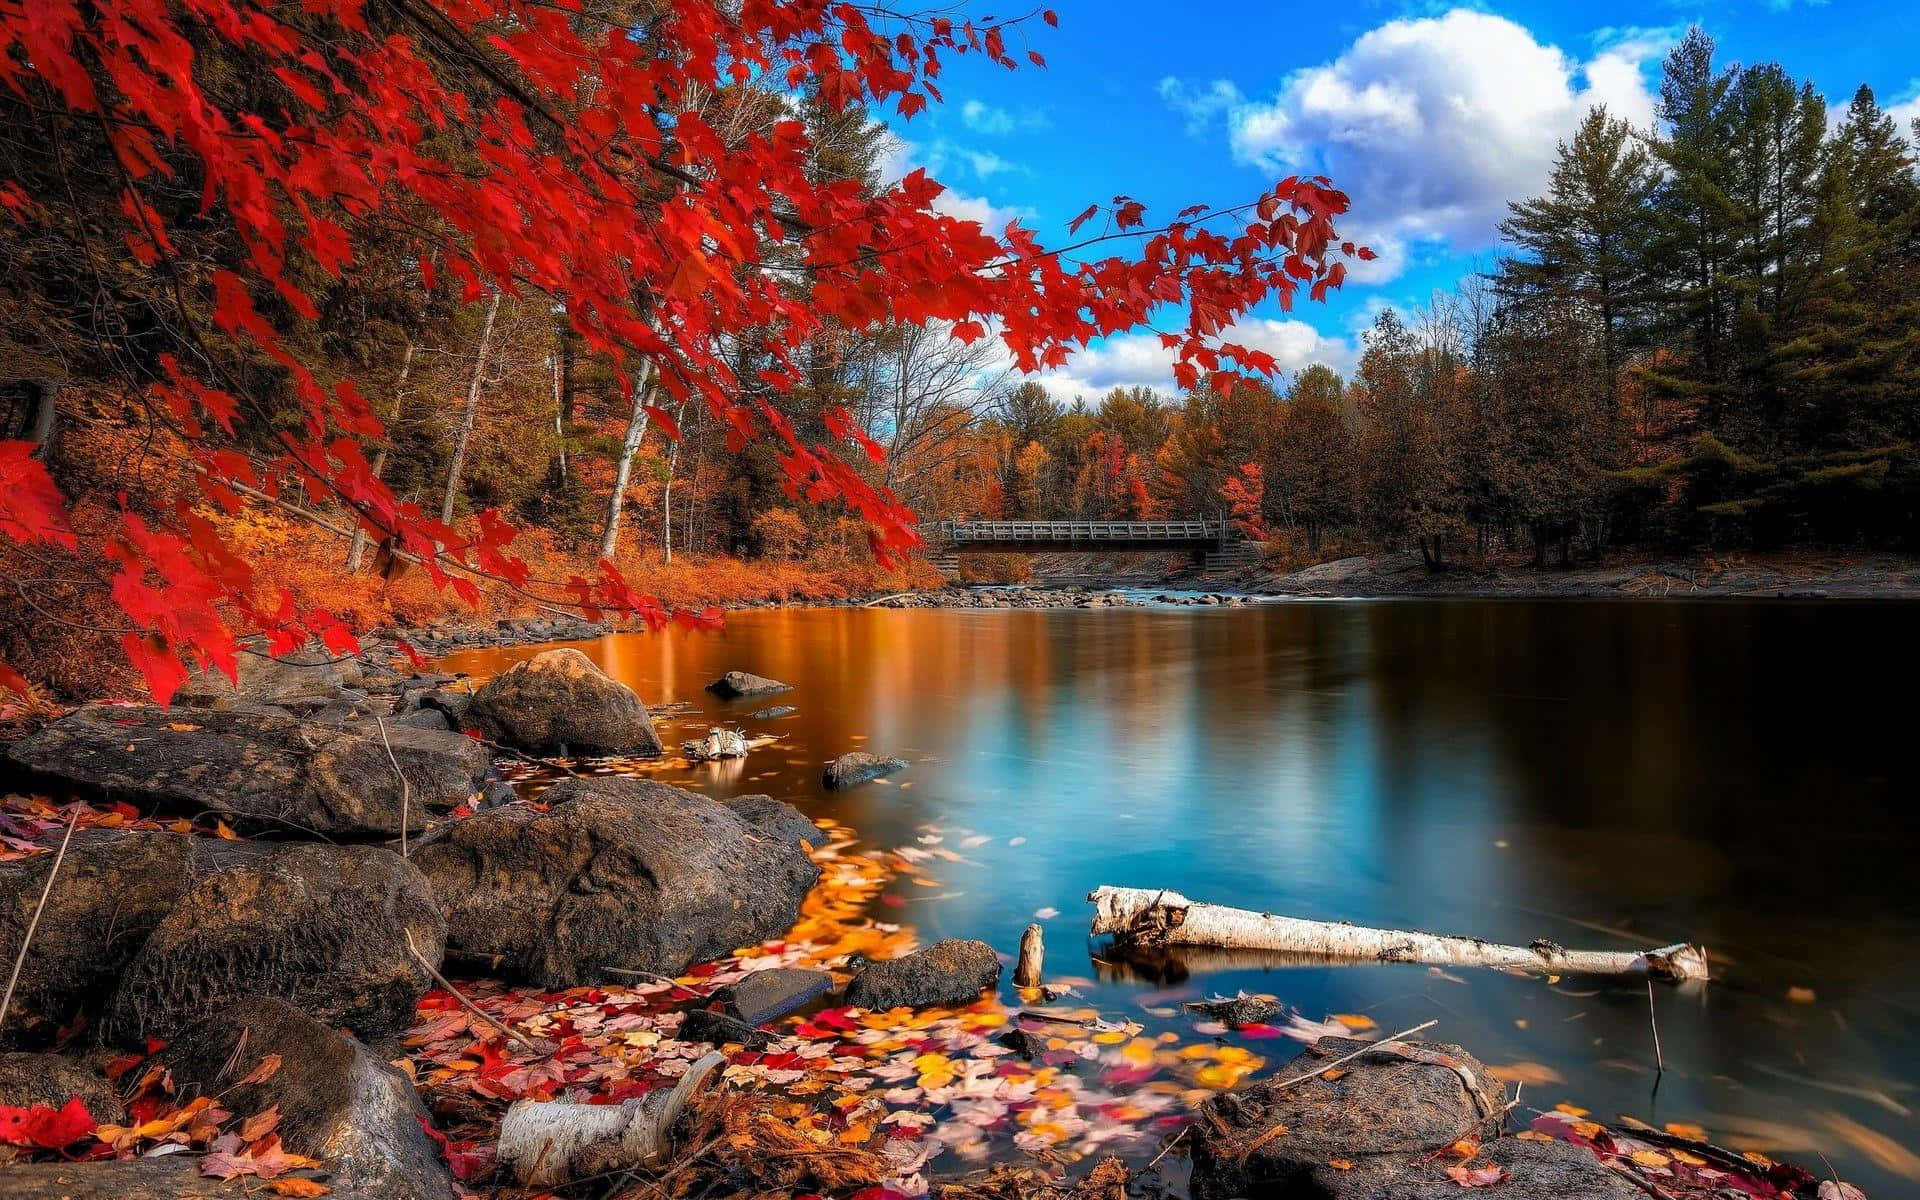 Witness Nature's beauty as fall comes alive